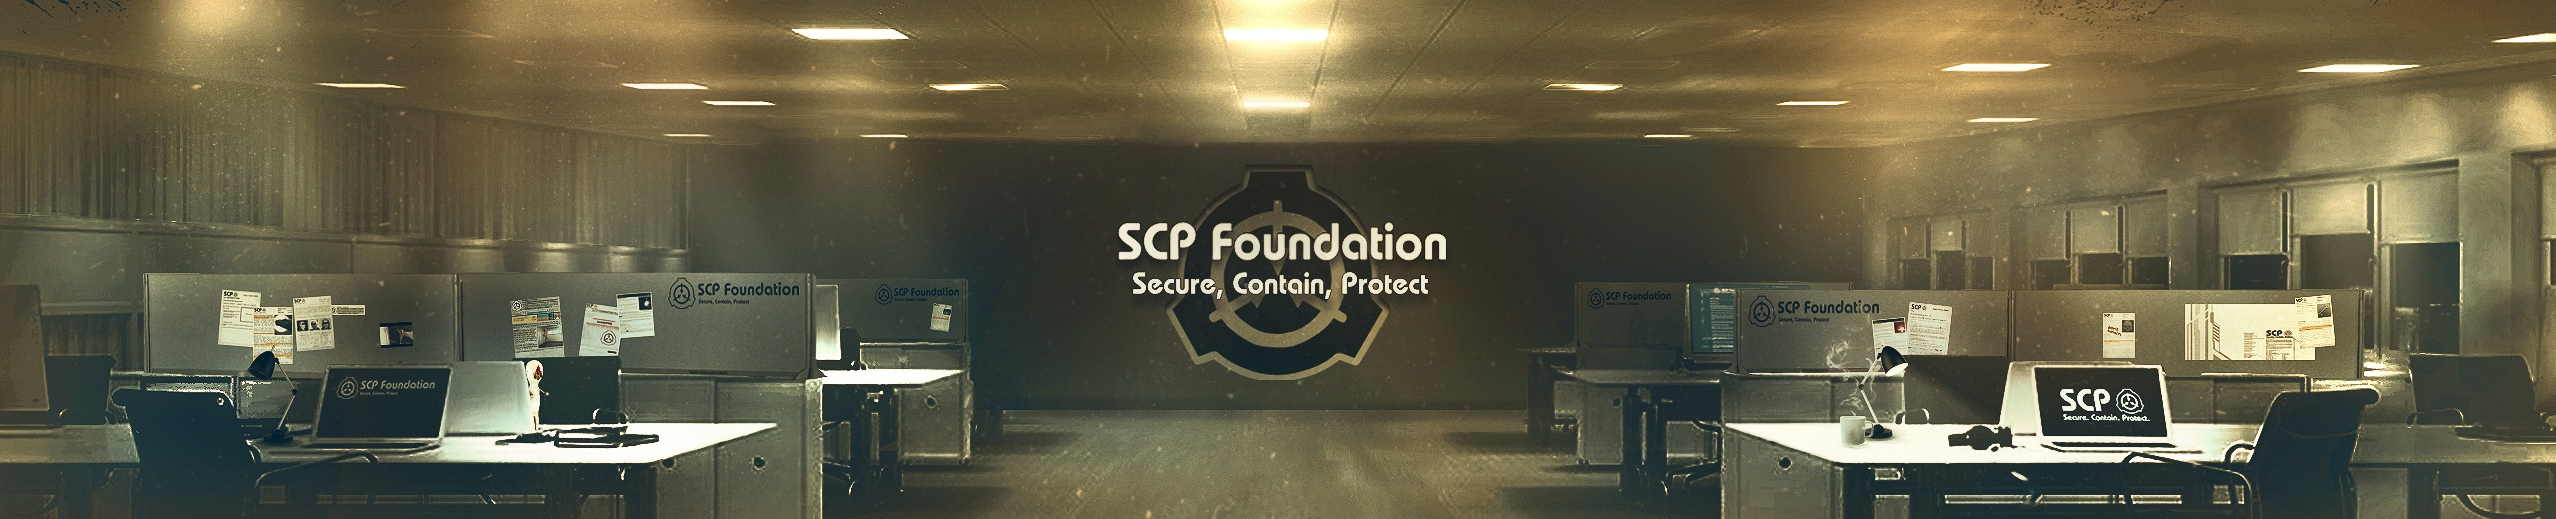 http://scpfoundation.net/local--files/site-7-media-hub/3658267.png